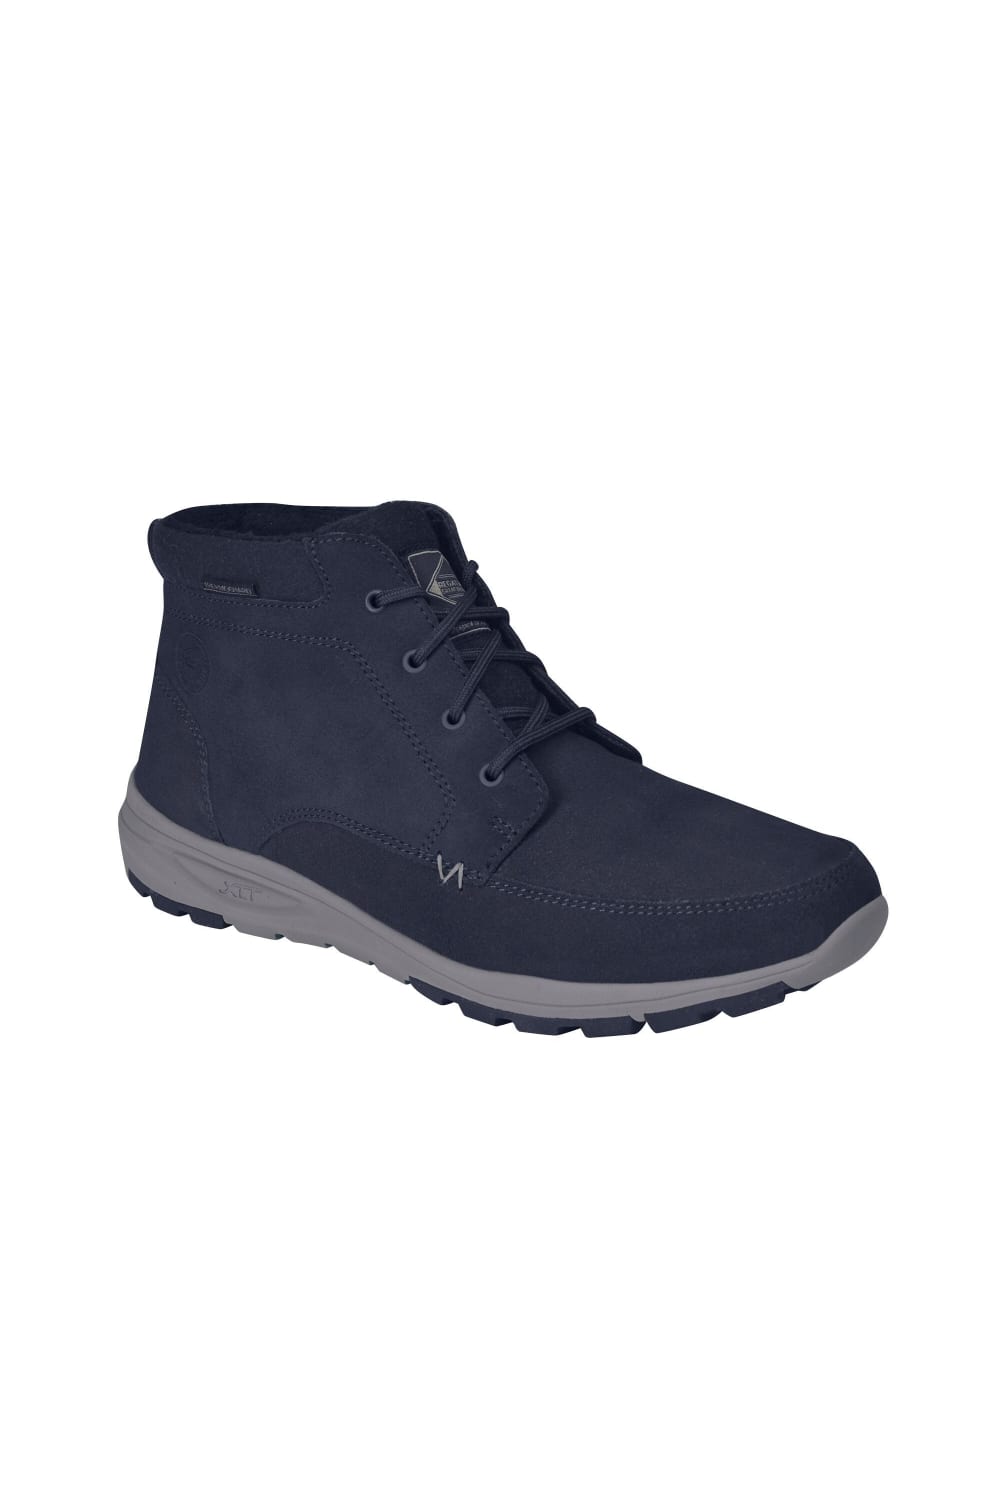 Great Outdoors Mens Marine Suede Leather Thermo Boots - Navy/Seal Grey